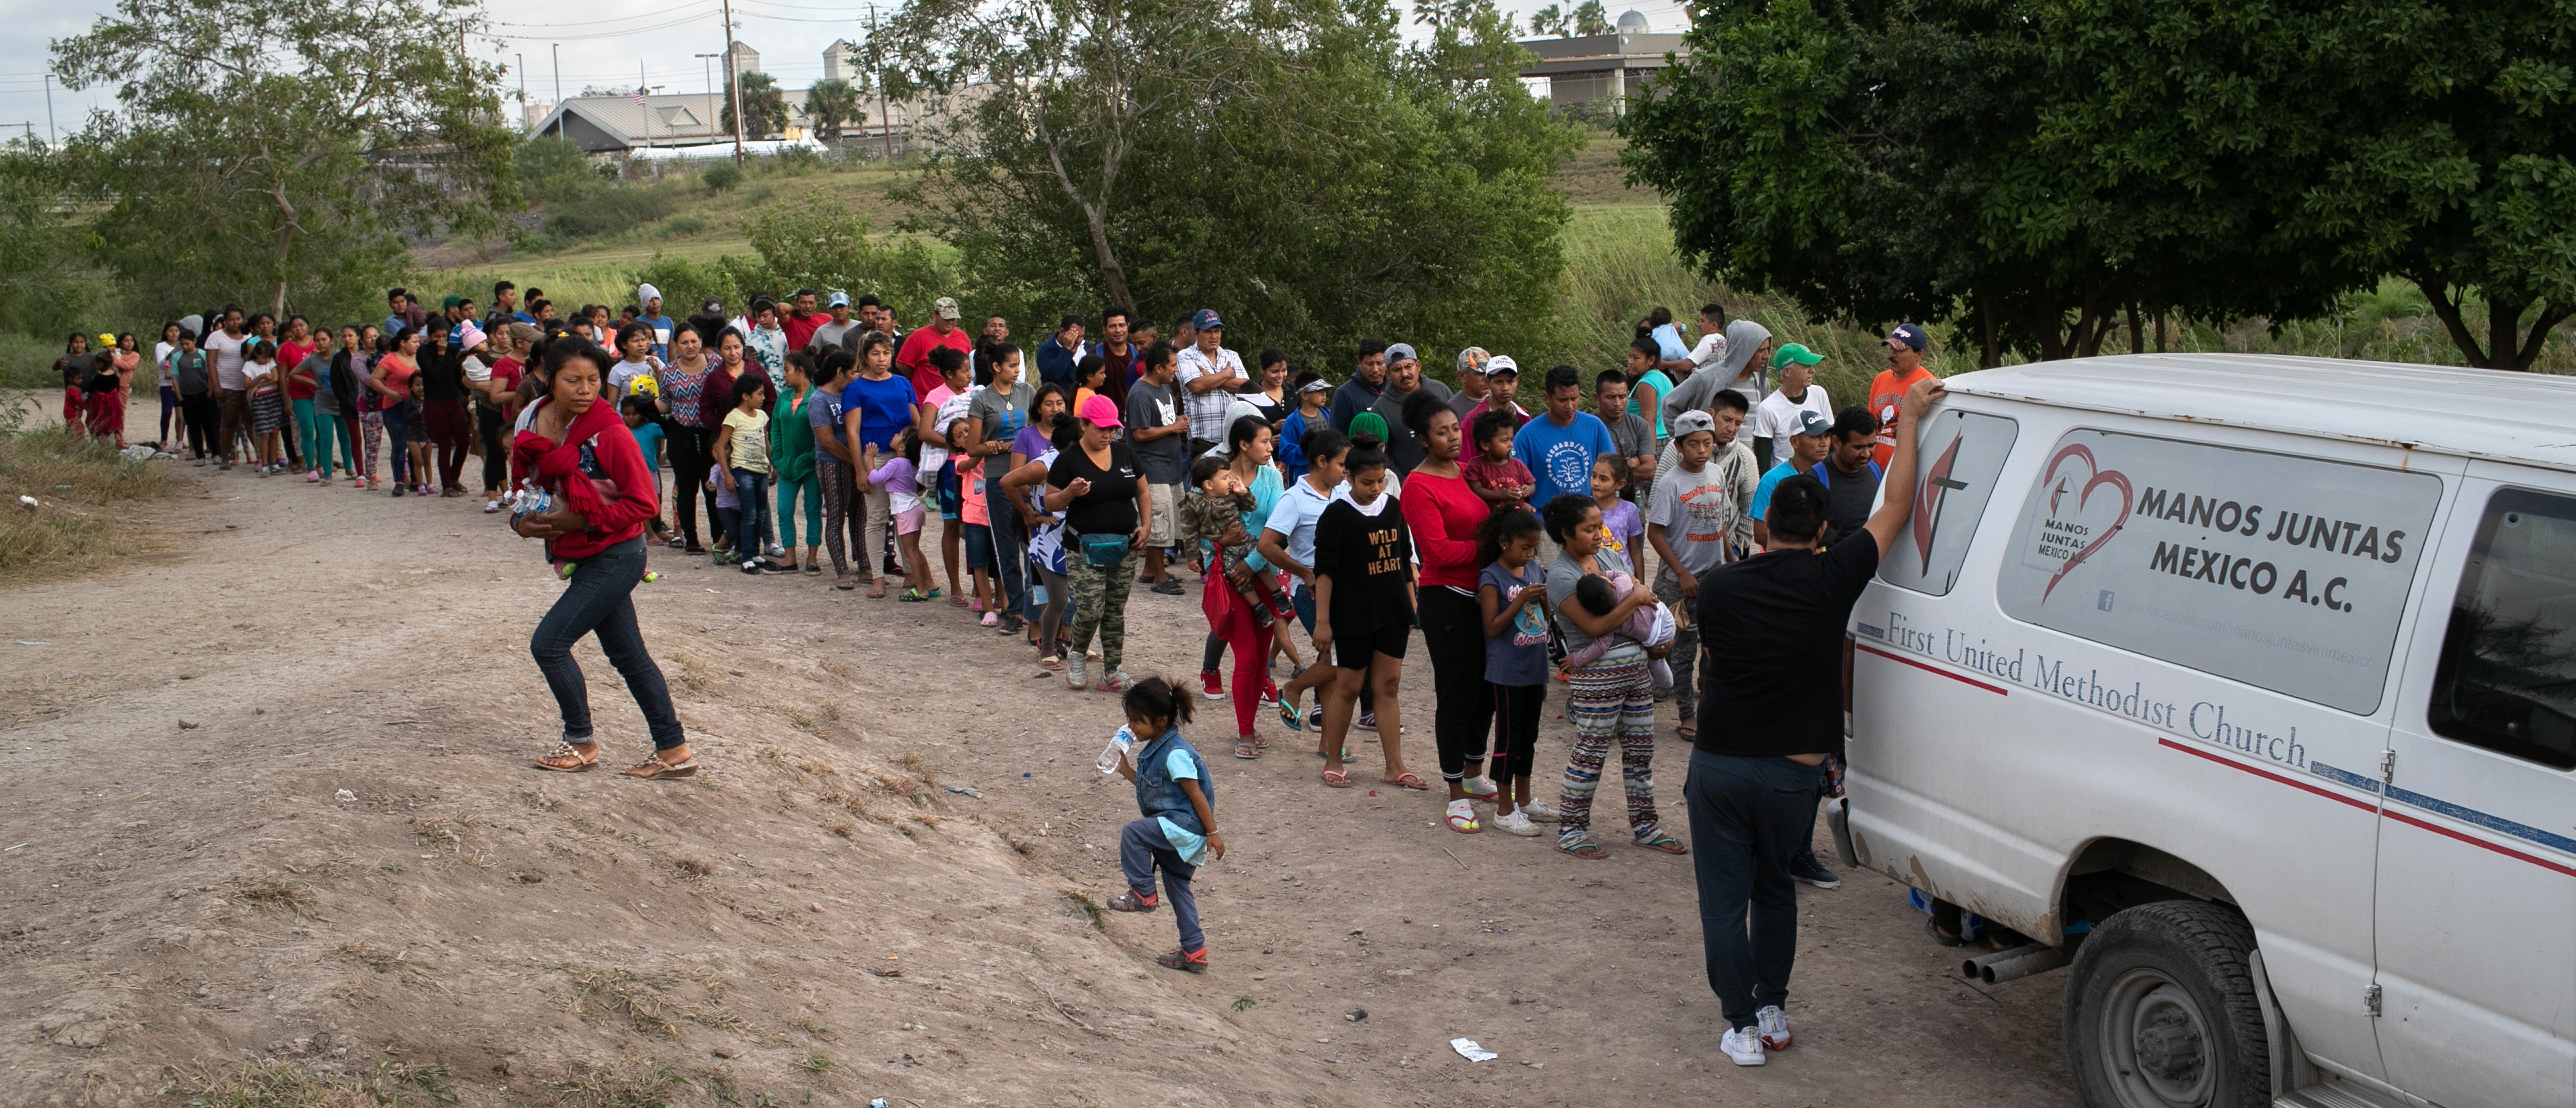 Asylum Seekers Fill Tent Camps As Part Of U.S. “Remain In Mexico” Policy